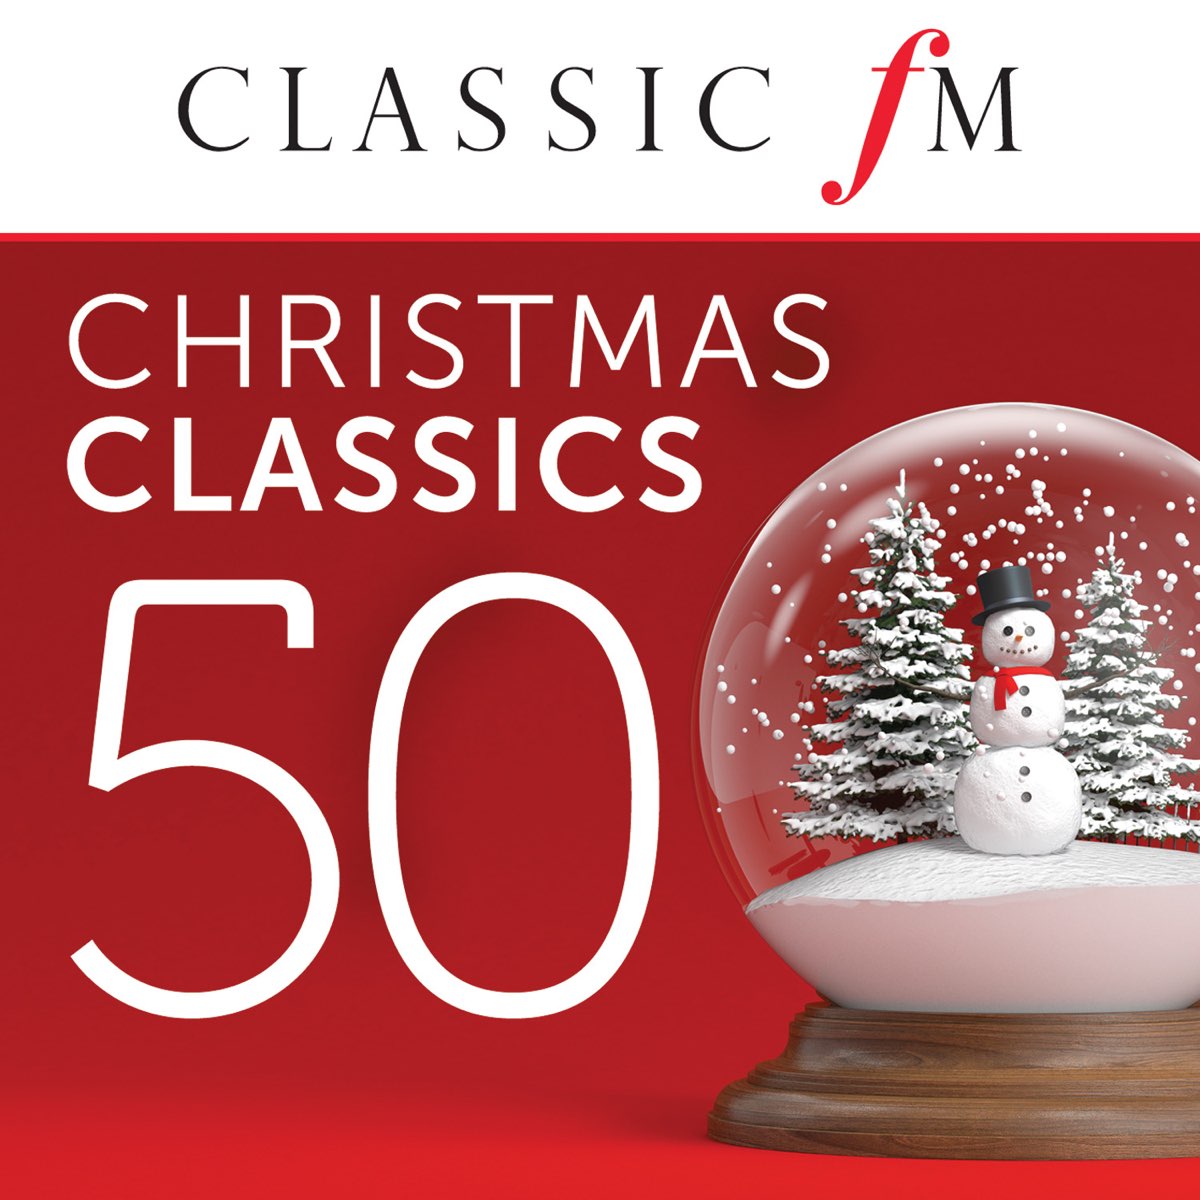 Classic FM Christmas playlist – here's how to listen - Classic FM